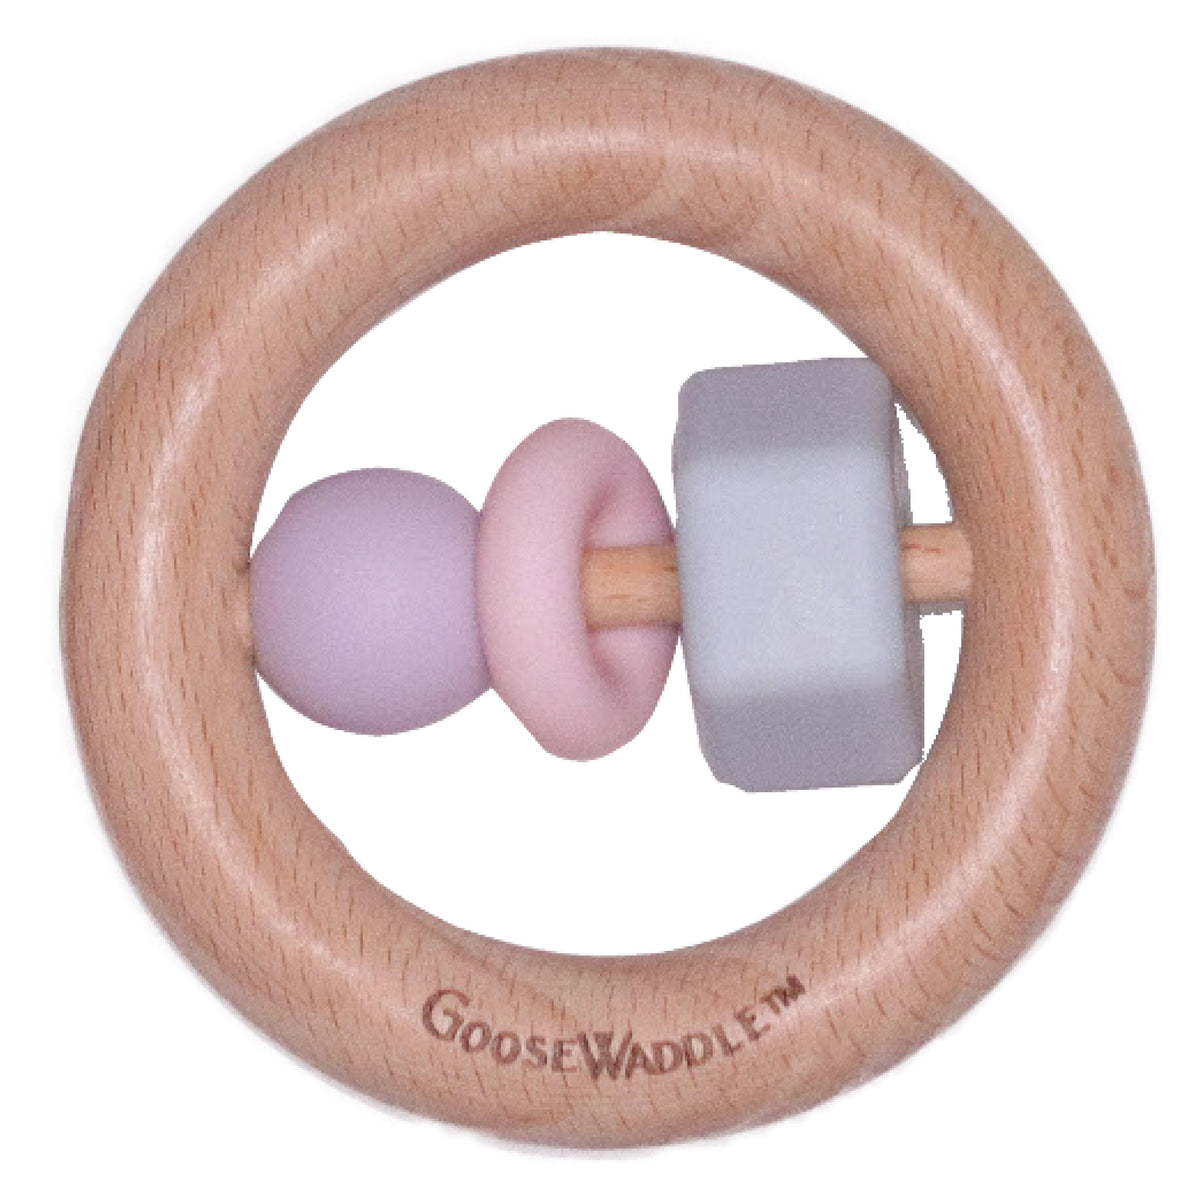 GooseWaddle Teether Wholesale Wooden and Silicone Teether (Pink, Lavender &amp; Gray)